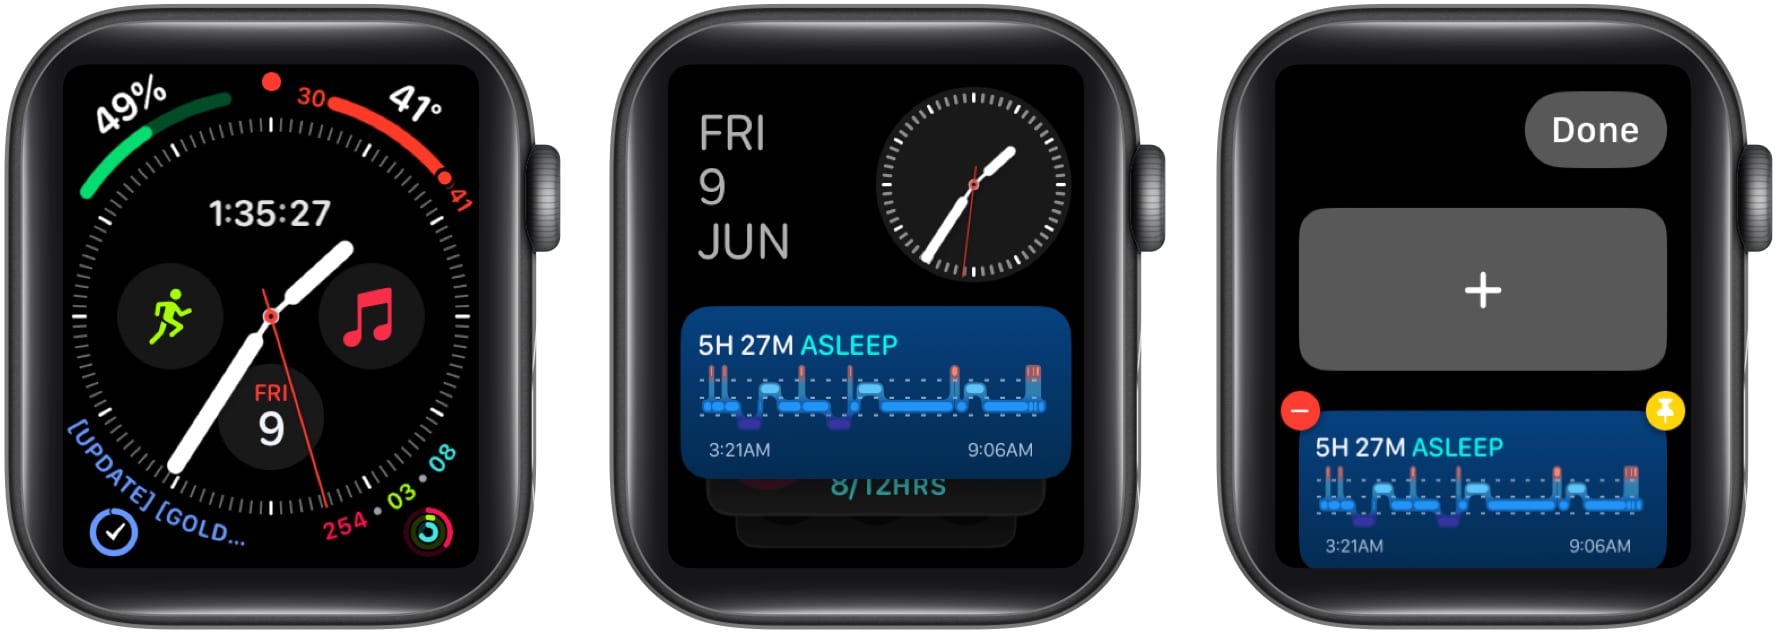 Swipe up on the watch face, Long-press any widget, Tap the Plus (+) button